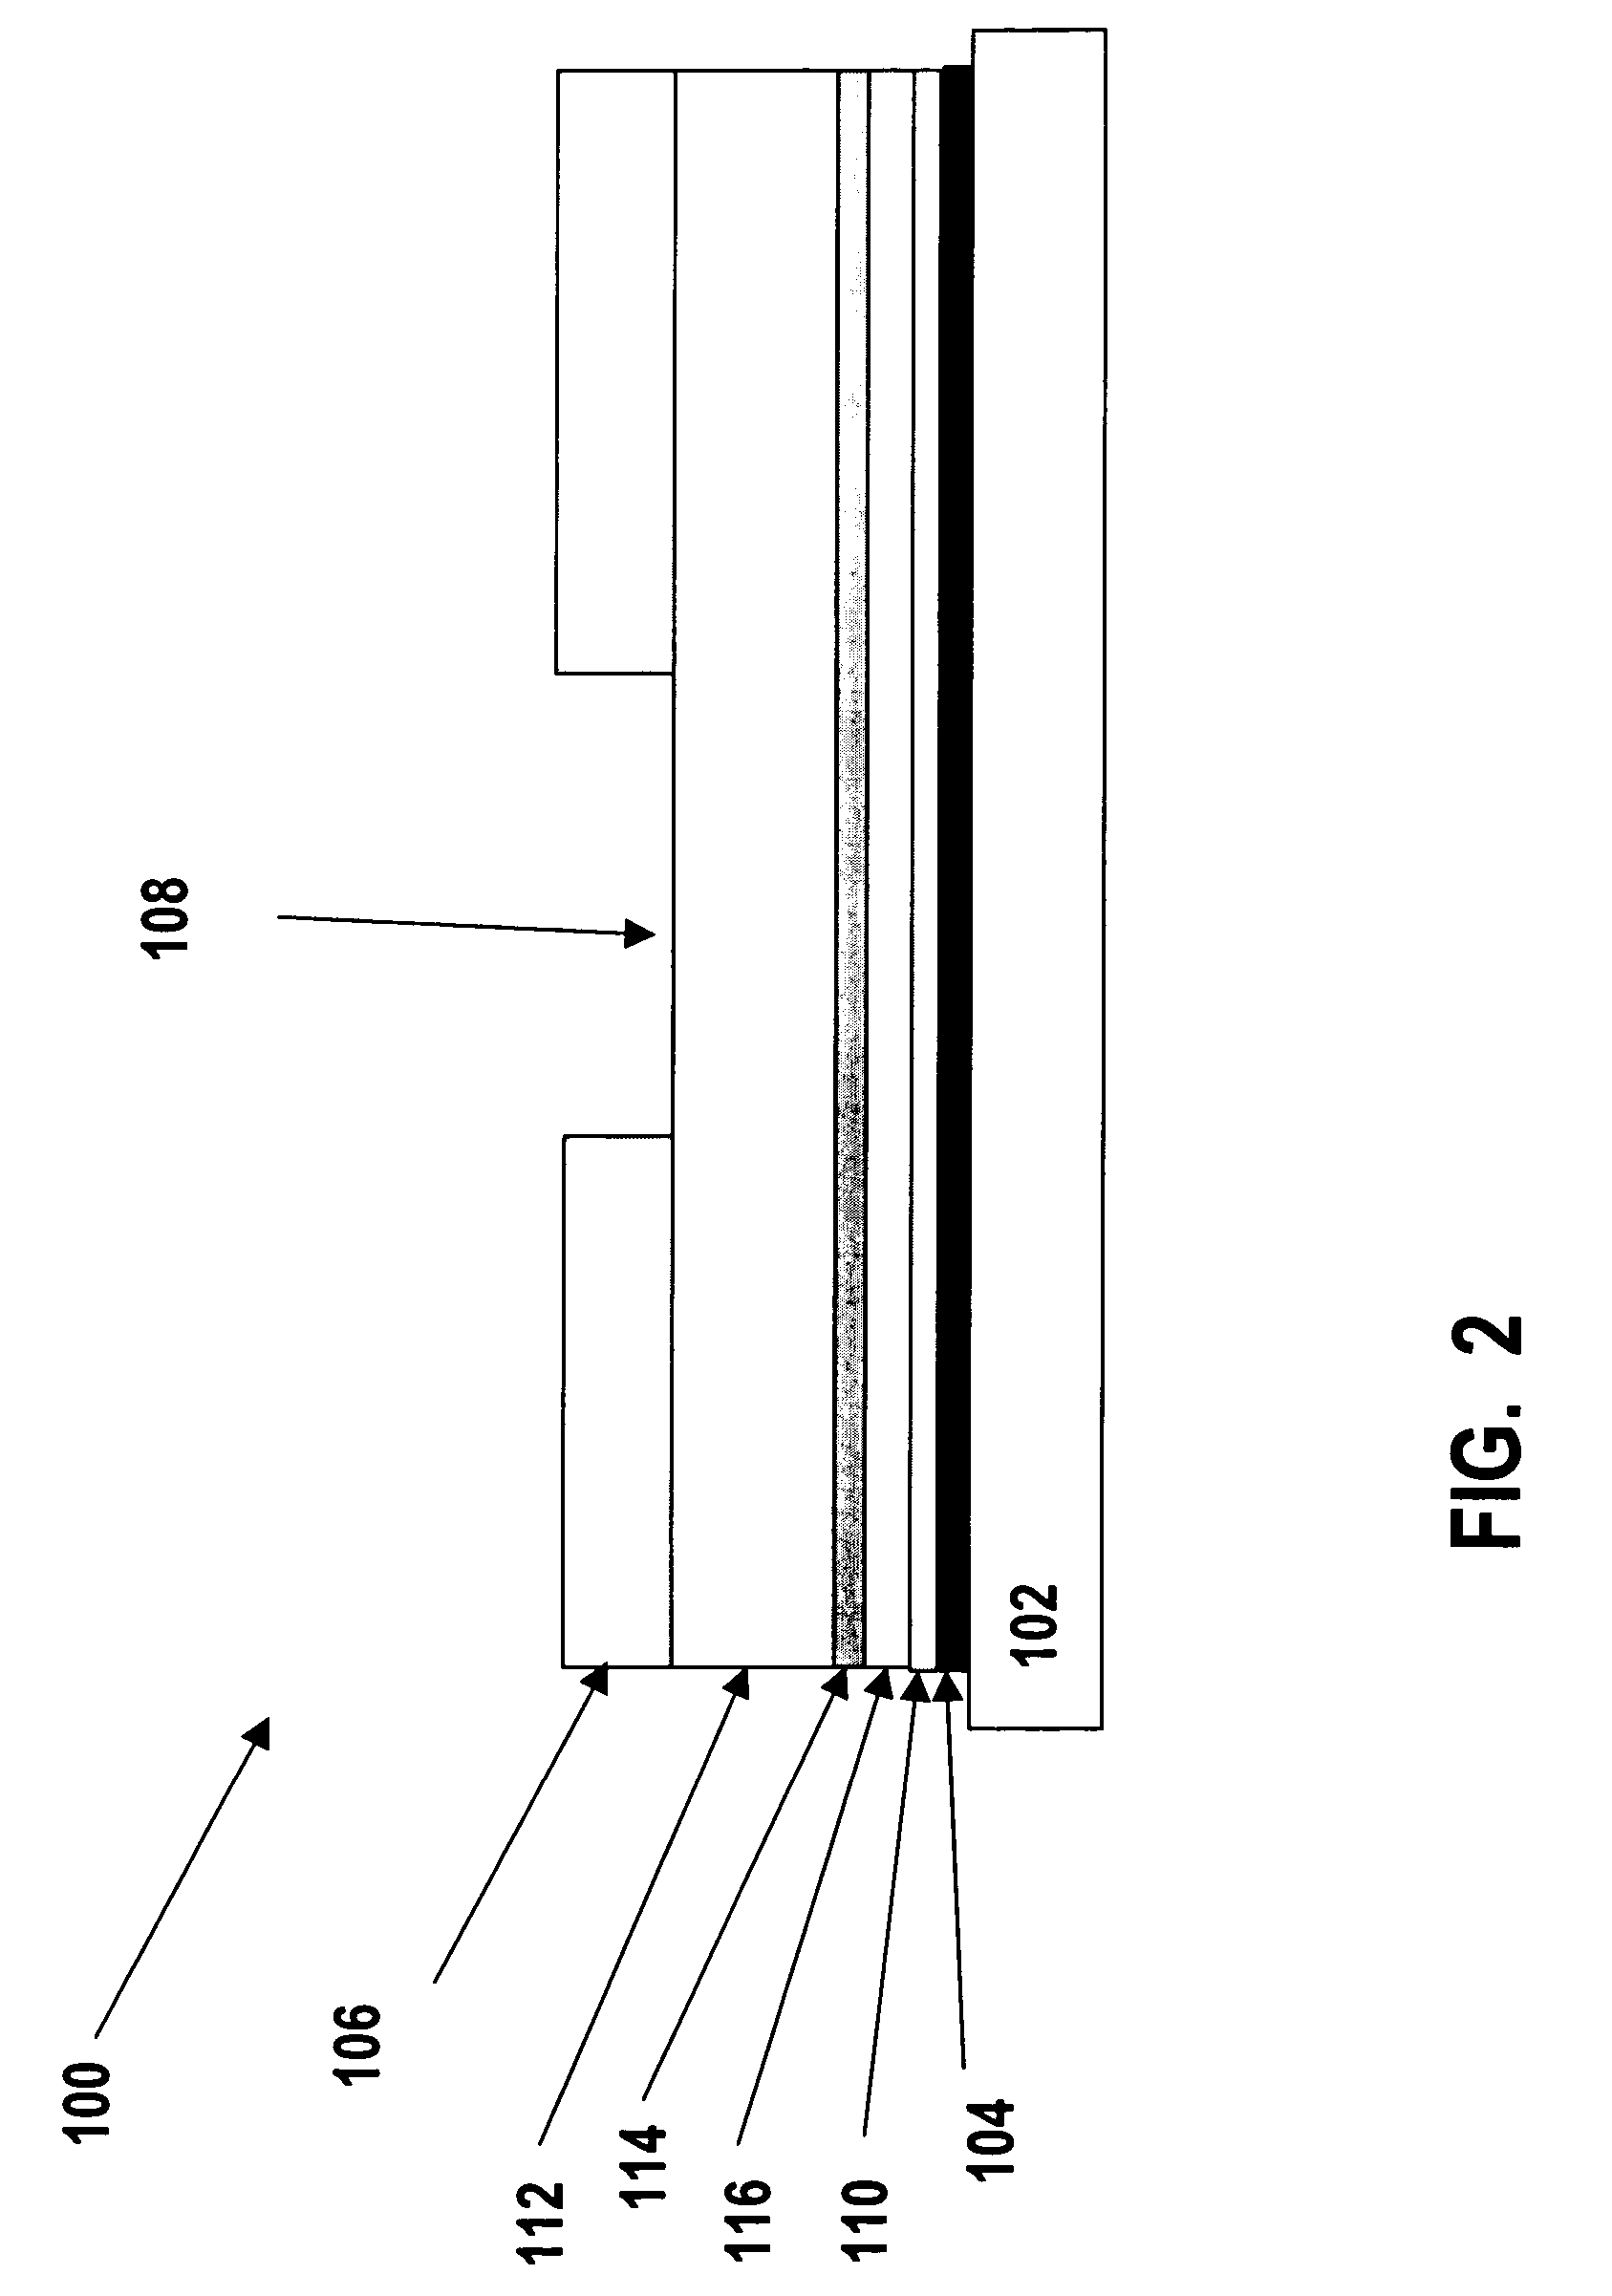 Polypeptide formulations and methods for making, using and characterizing them